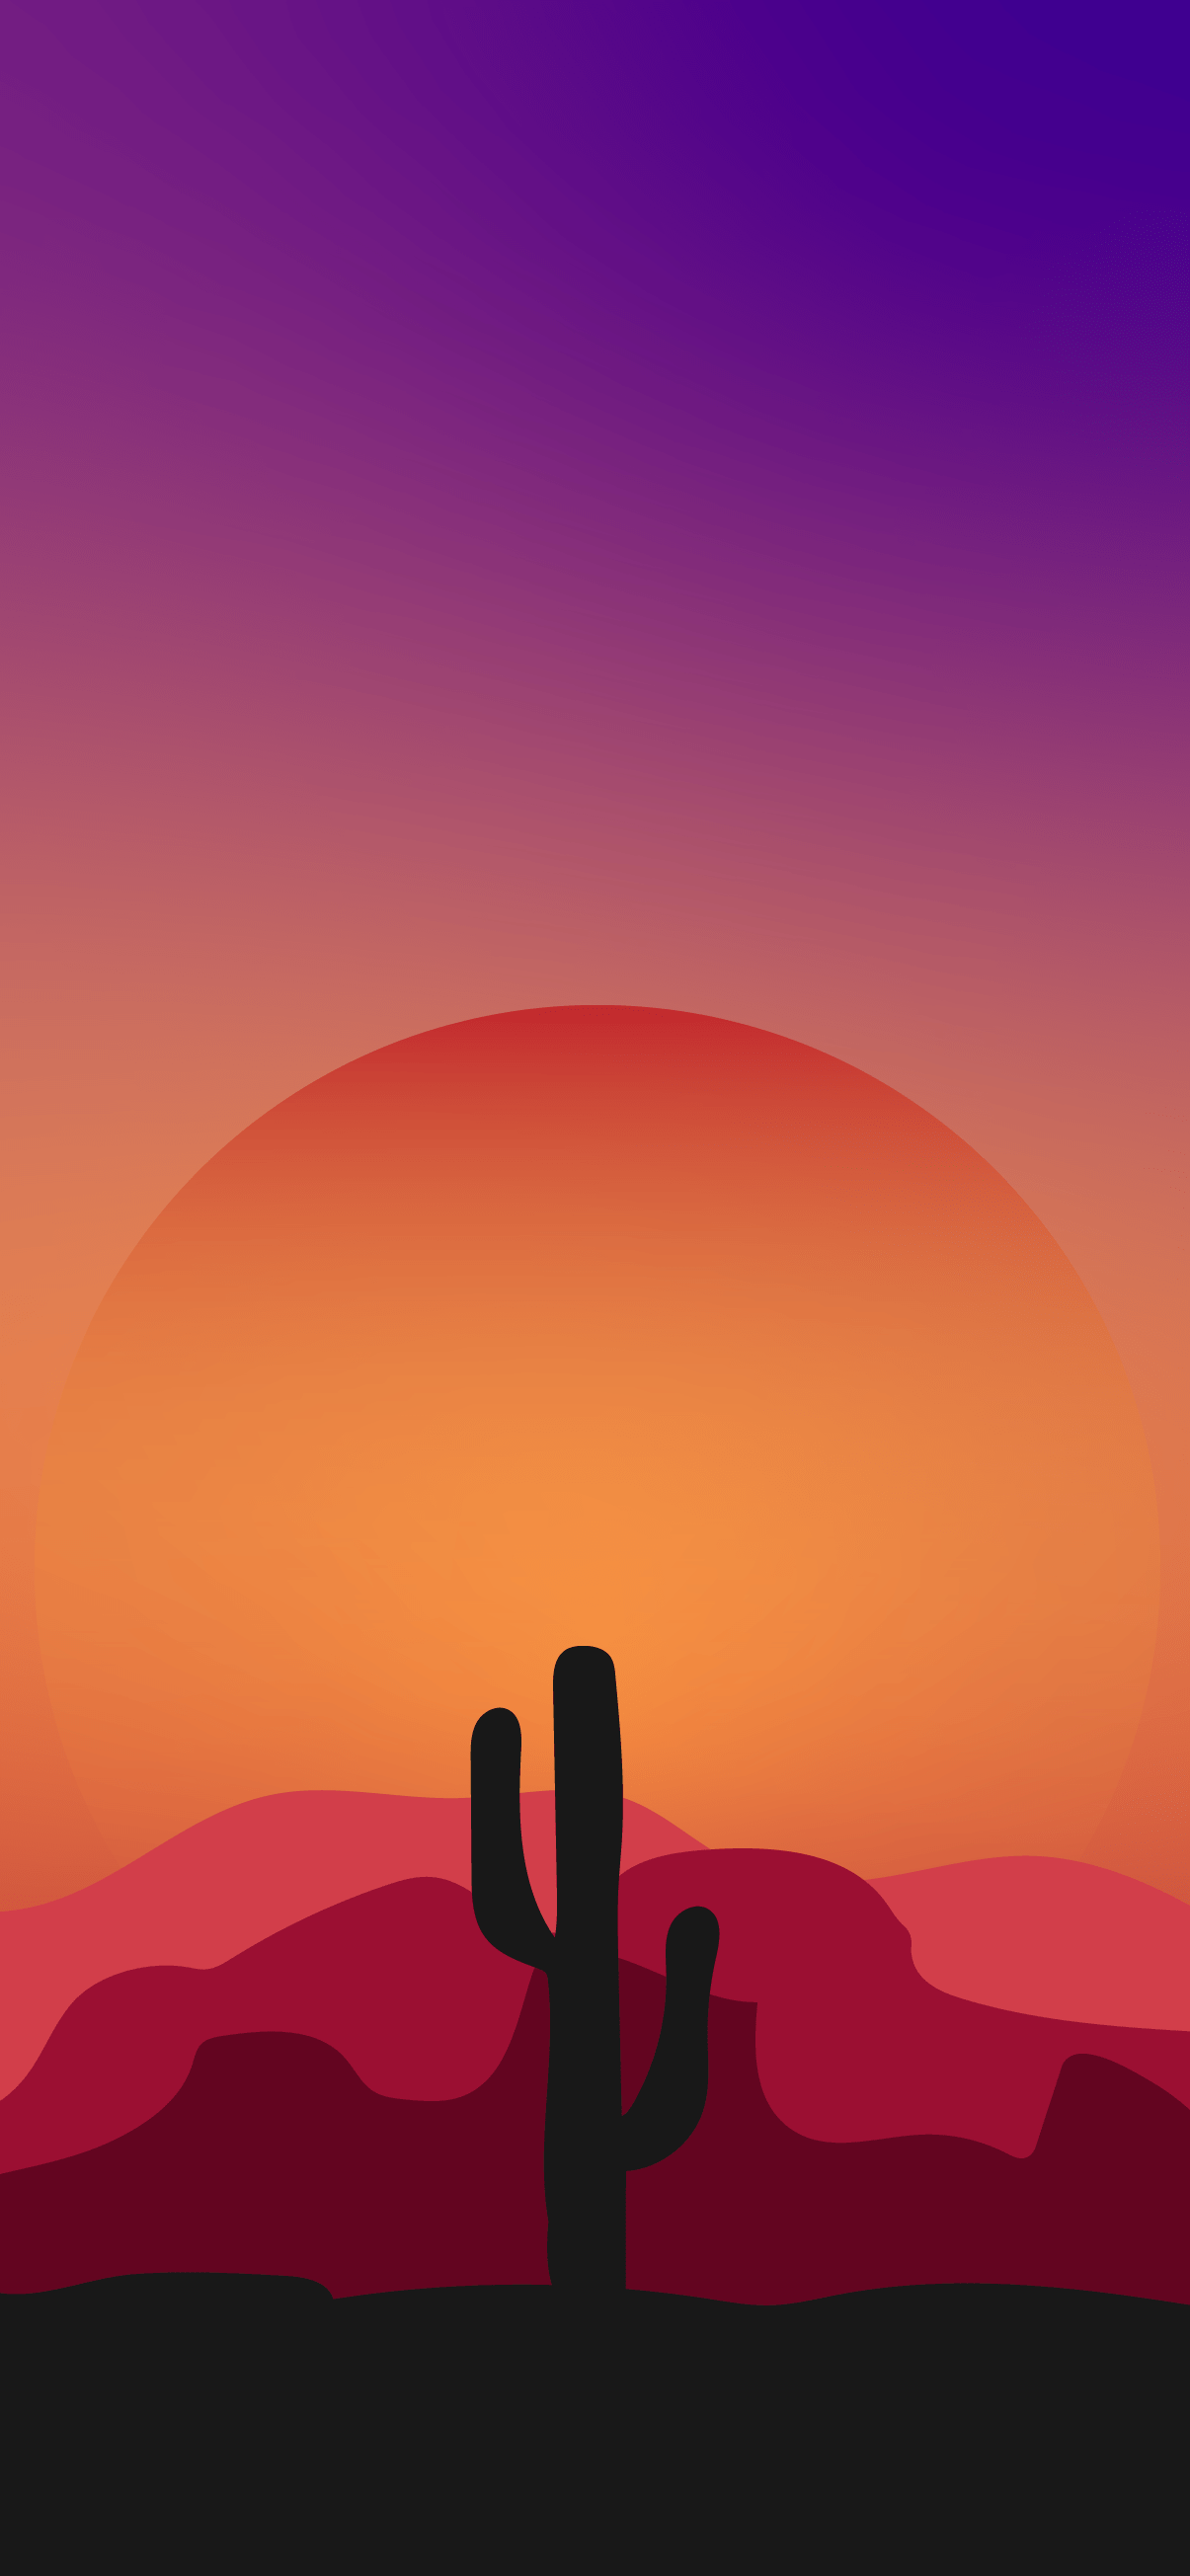 A desert landscape with a cactus in front of a large sun - Desert